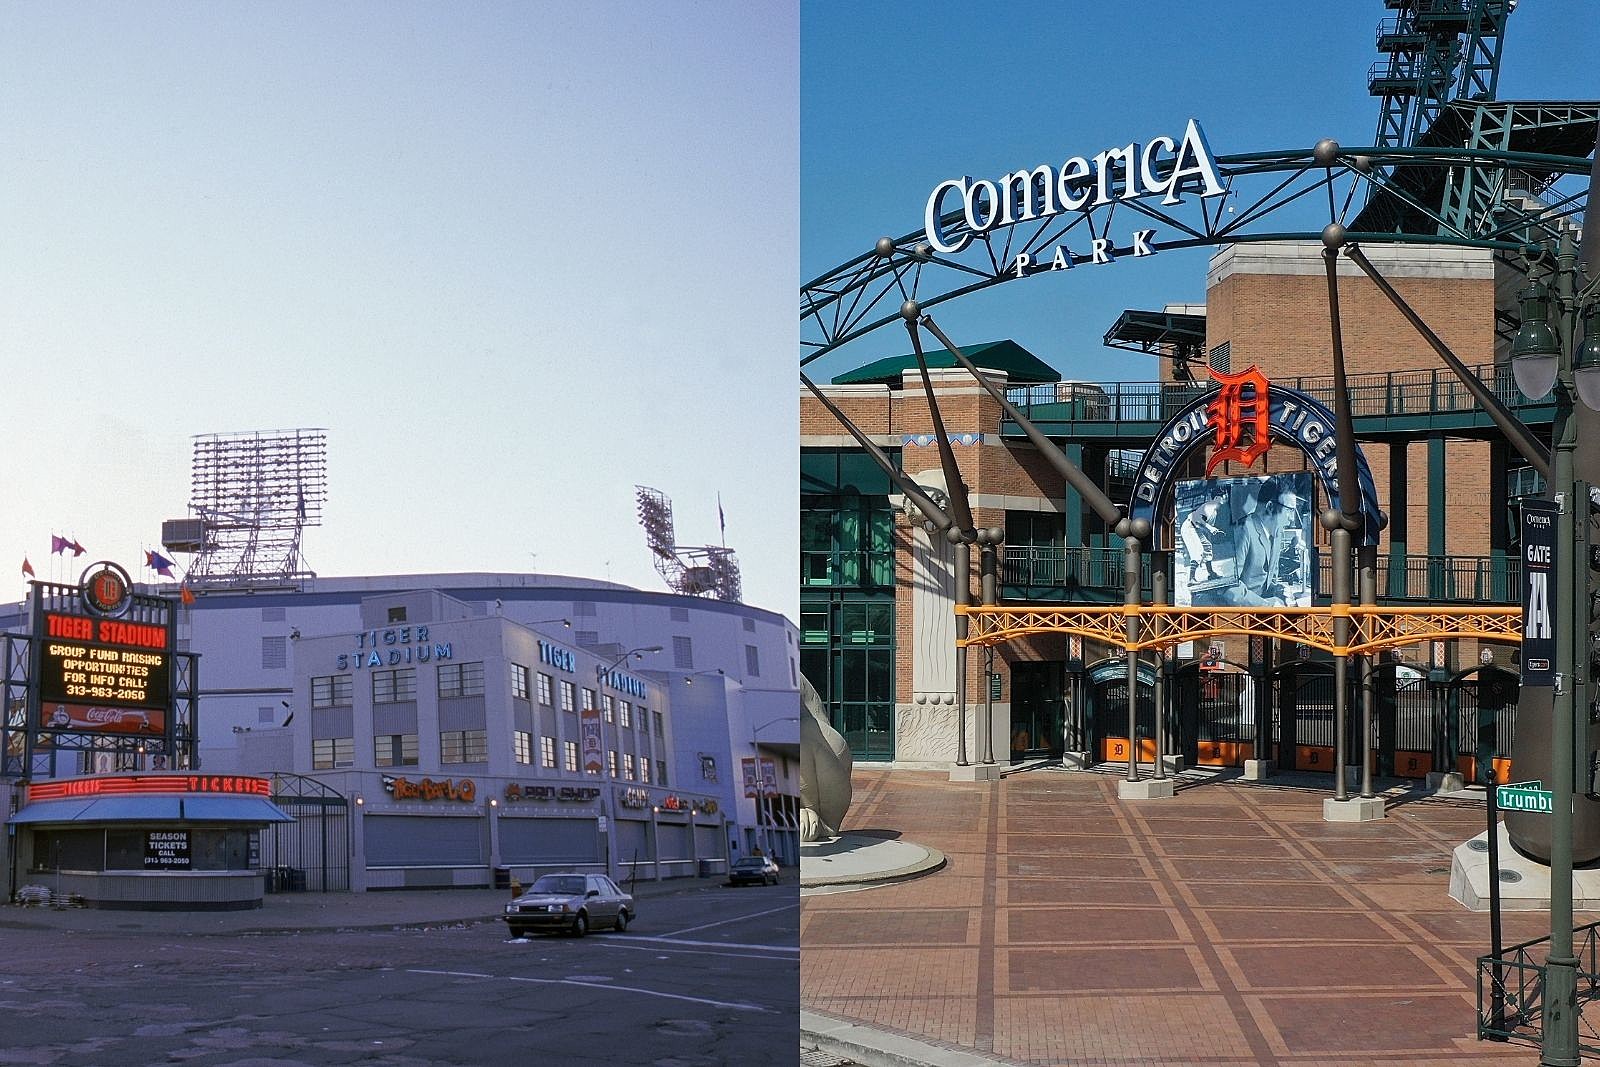 What's Your Preference, Tiger Stadium or Comerica Park?